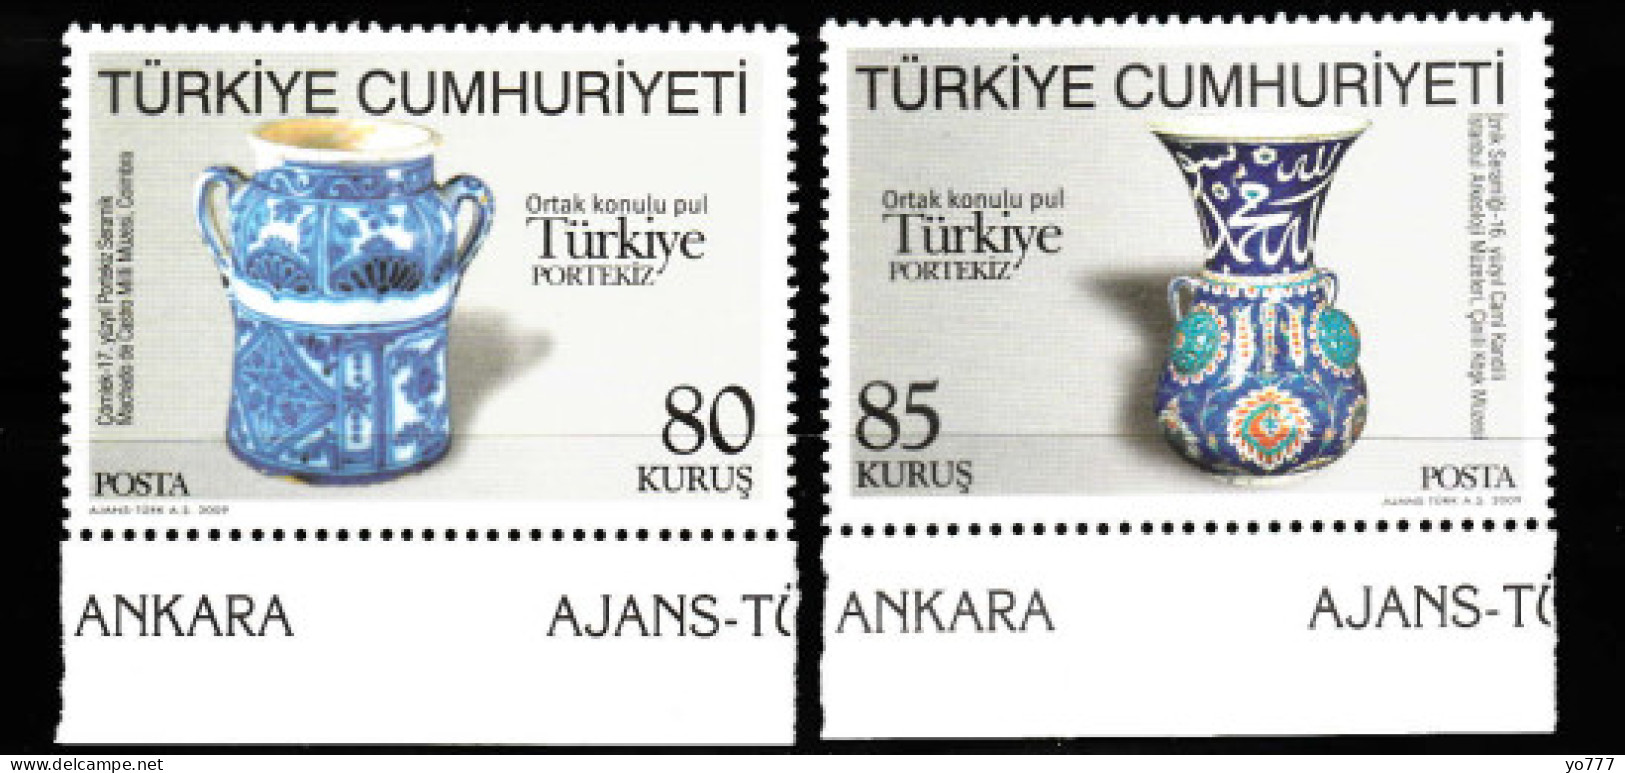 (3734-35) JOINT ISSUE OF STAMPS BETWEEN TURKEY-PORTUGAL MNH ** - Ongebruikt